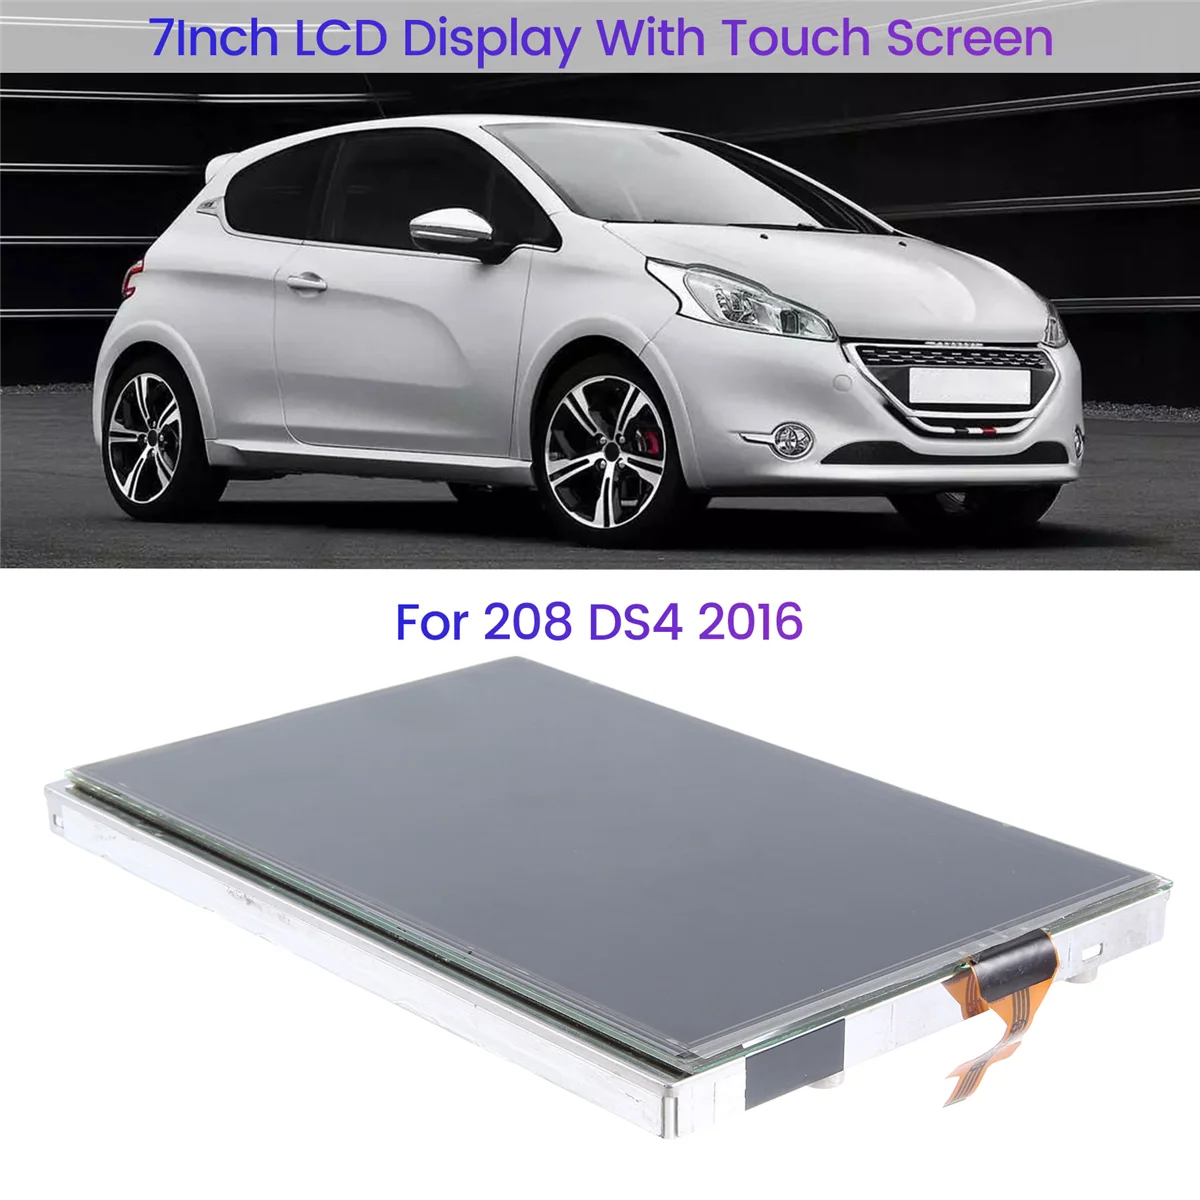 7inch-lcd-display-with-touch-screen-lam070g004a-gcx156akm-e-for-peugeot-208-citroen-ds4-2016-car-gps-lcd-monitors